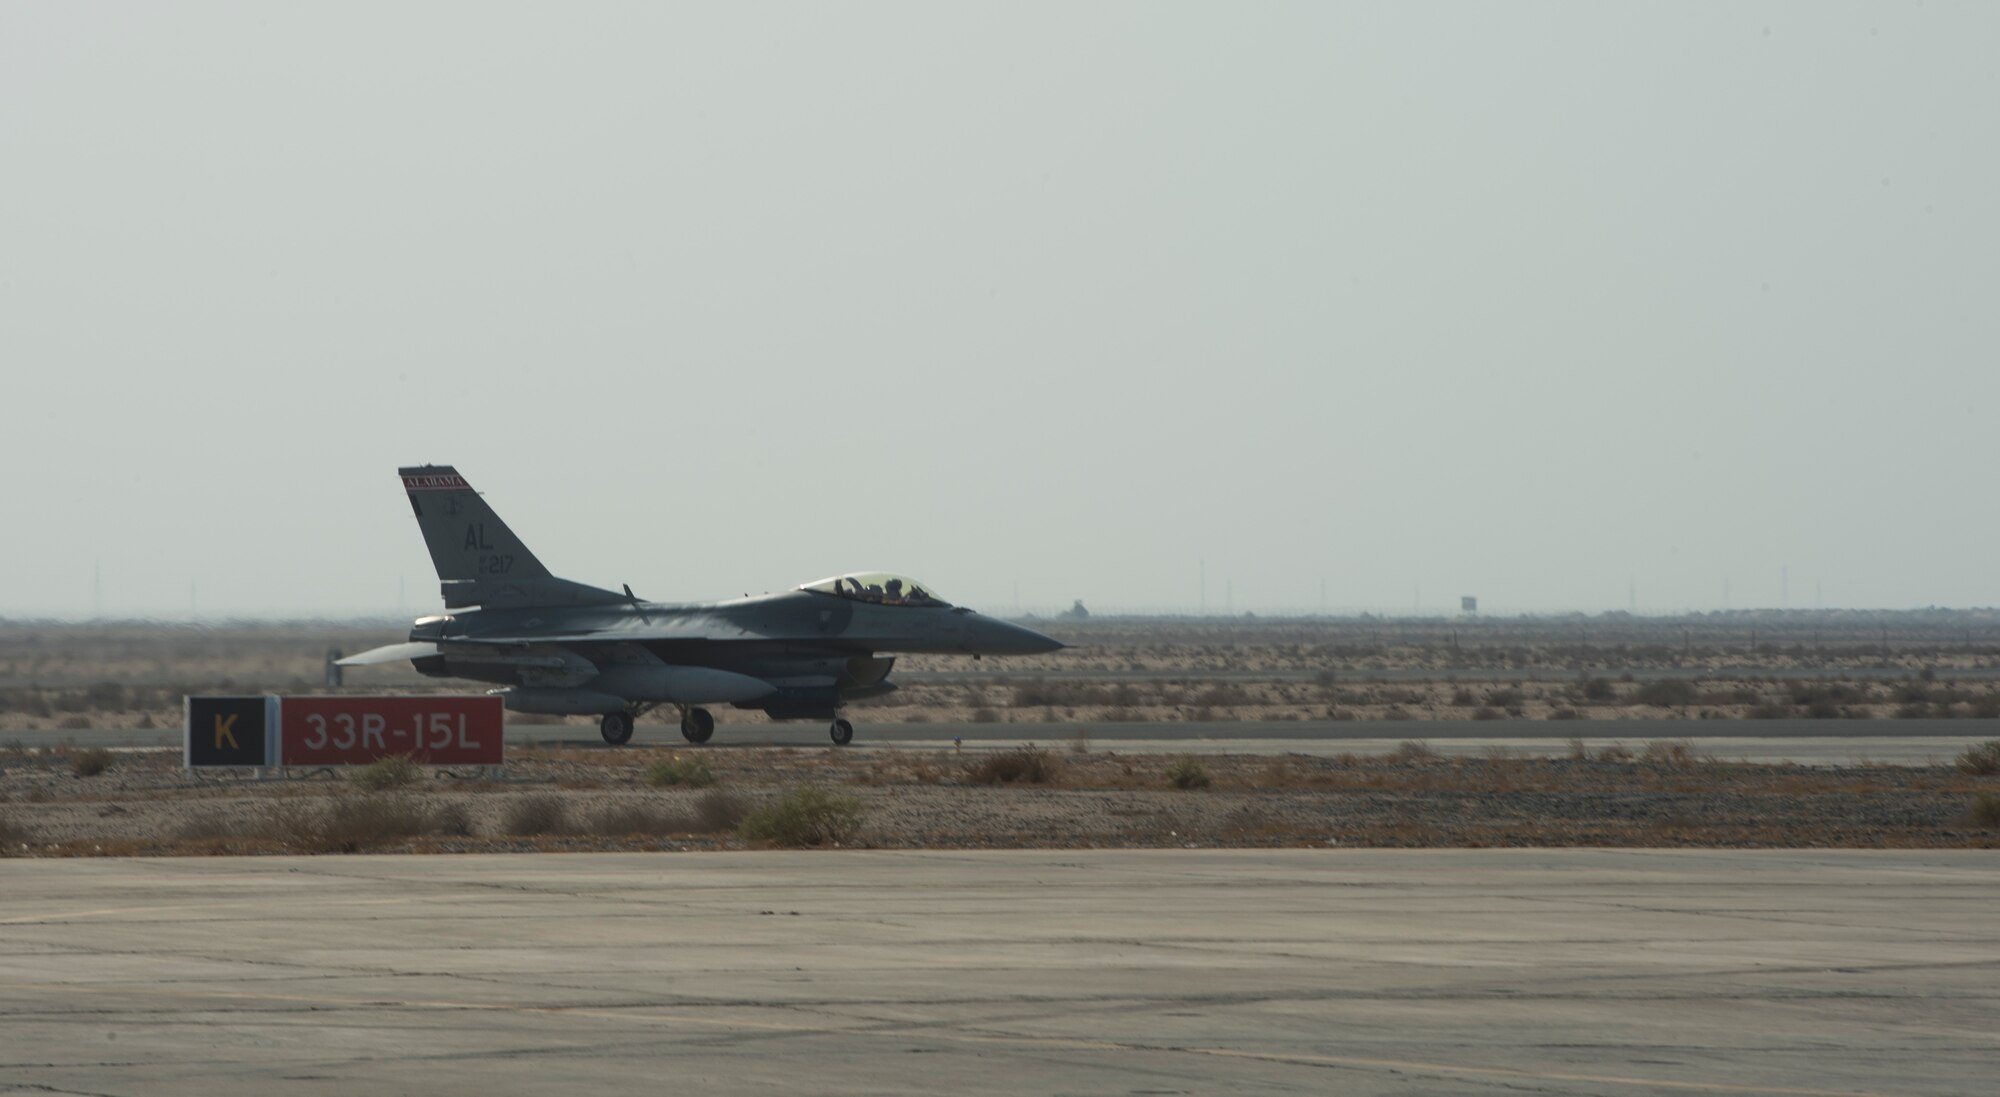 An F-16 Fighting Falcon from the 100th Fighter Squadron arrives at the 407th Air Expeditionary Group in Southwest Asia, Oct. 16, 2017. In an air combat role, the F-16's maneuverability and combat radius exceed that of all potential threat fighter aircraft. It can locate targets in all weather conditions and detect low flying aircraft in radar ground clutter. (U.S. Air Force photo by Staff Sgt. Sean Martin/Released)